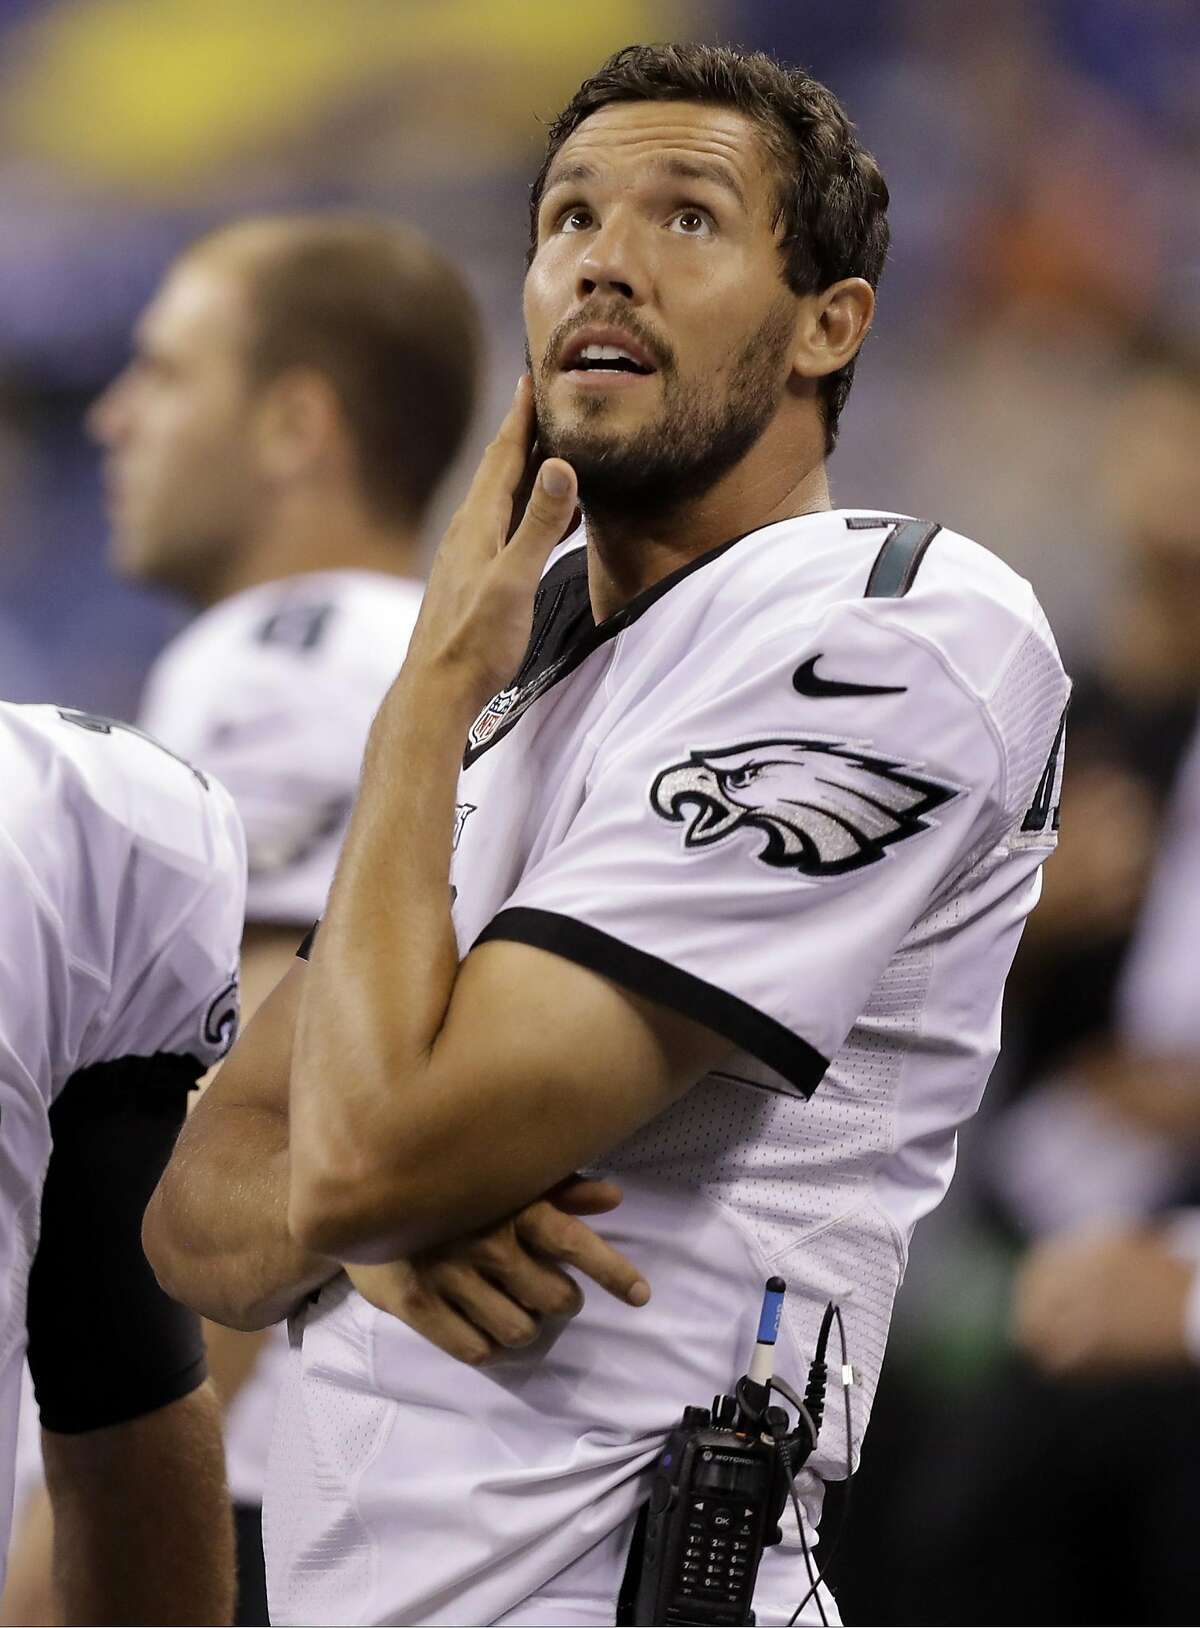 FILE - In this Saturday, Aug. 27, 2016, file photo, Philadelphia Eagles quarterback Sam Bradford watches from the sideline during the second half of an NFL preseason football game against the Indianapolis Colts in Indianapolis. The Eagles traded Bradford Saturday, Sept. 3, 2016, to the Minnesota Vikings for a pair of draft picks. Bradford replaces Teddy Bridgewater, who went down for the season after suffering a gruesome knee injury this week. The Eagles receive a first-round pick in 2017 and a fourth-round pick in 2018. (AP Photo/Darron Cummings, File)